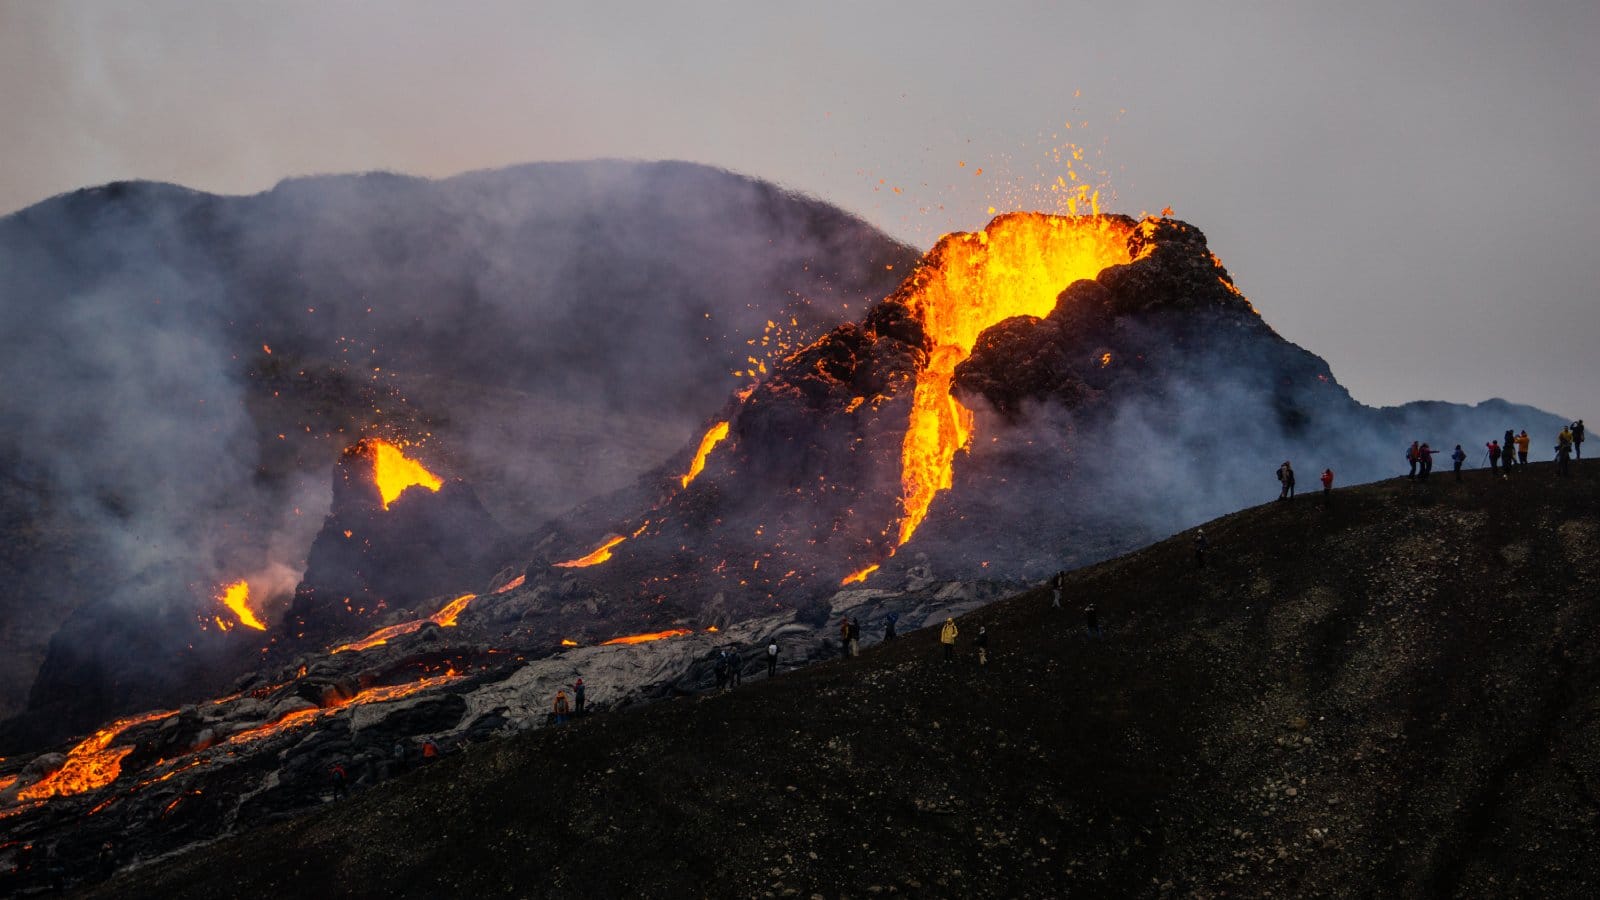 Image Credit: Shutterstock / DanielFreyr <p>Tourist destinations like Indonesia and Iceland are prone to volcanic eruptions, which can disrupt travel. Monitor volcanic activity through local news and geological surveys.</p>